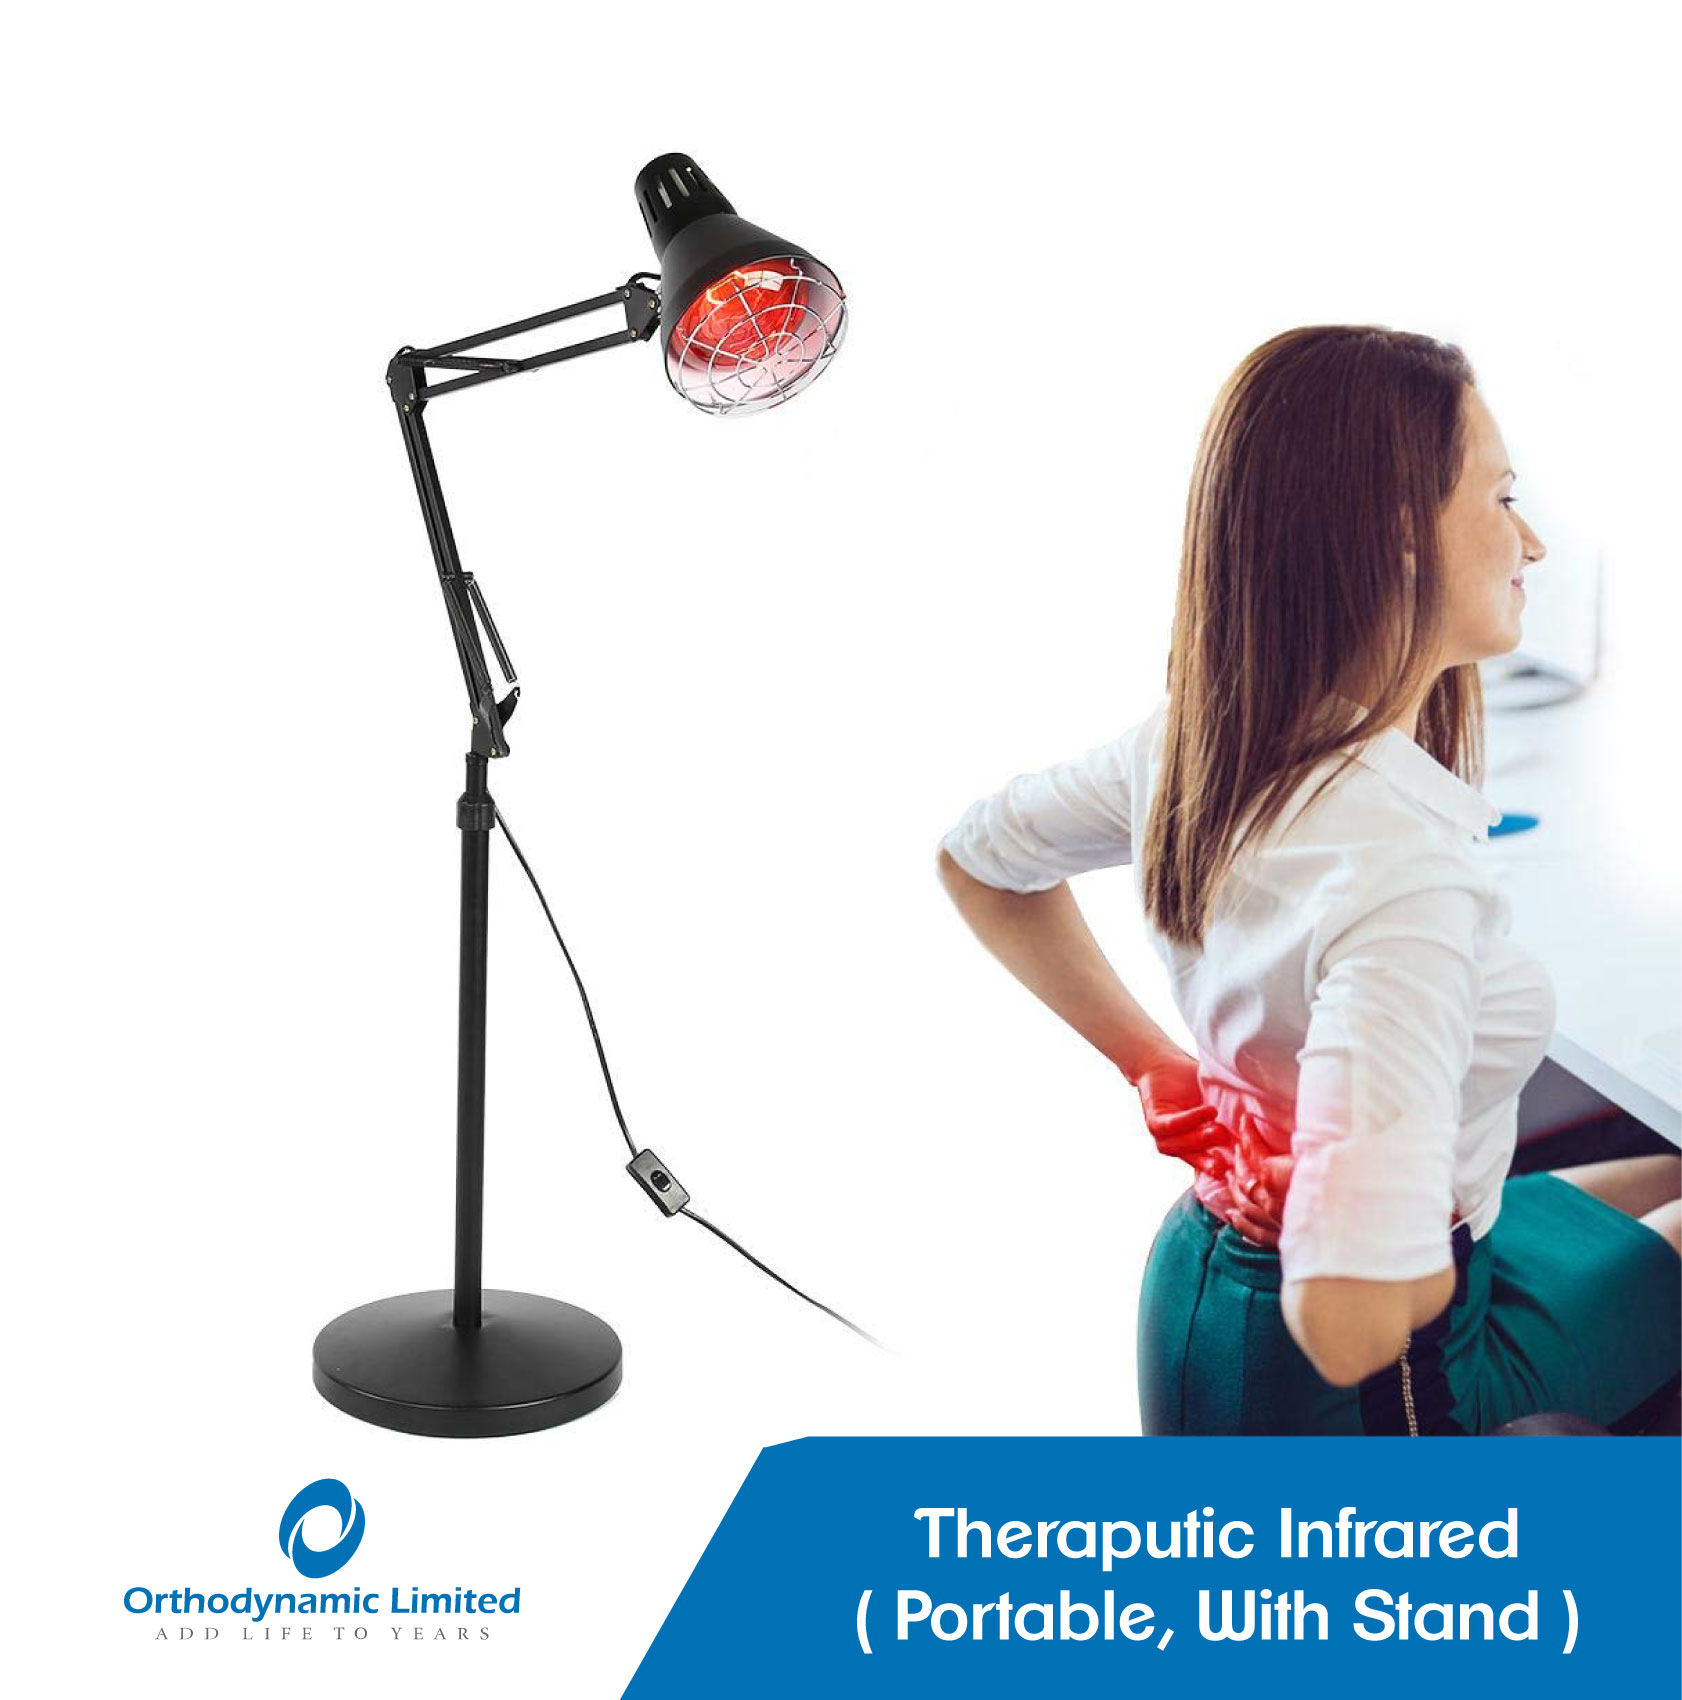 Stand Infrared Light Heating Therapy - Orthodynamic Ltd, Call 0705442020